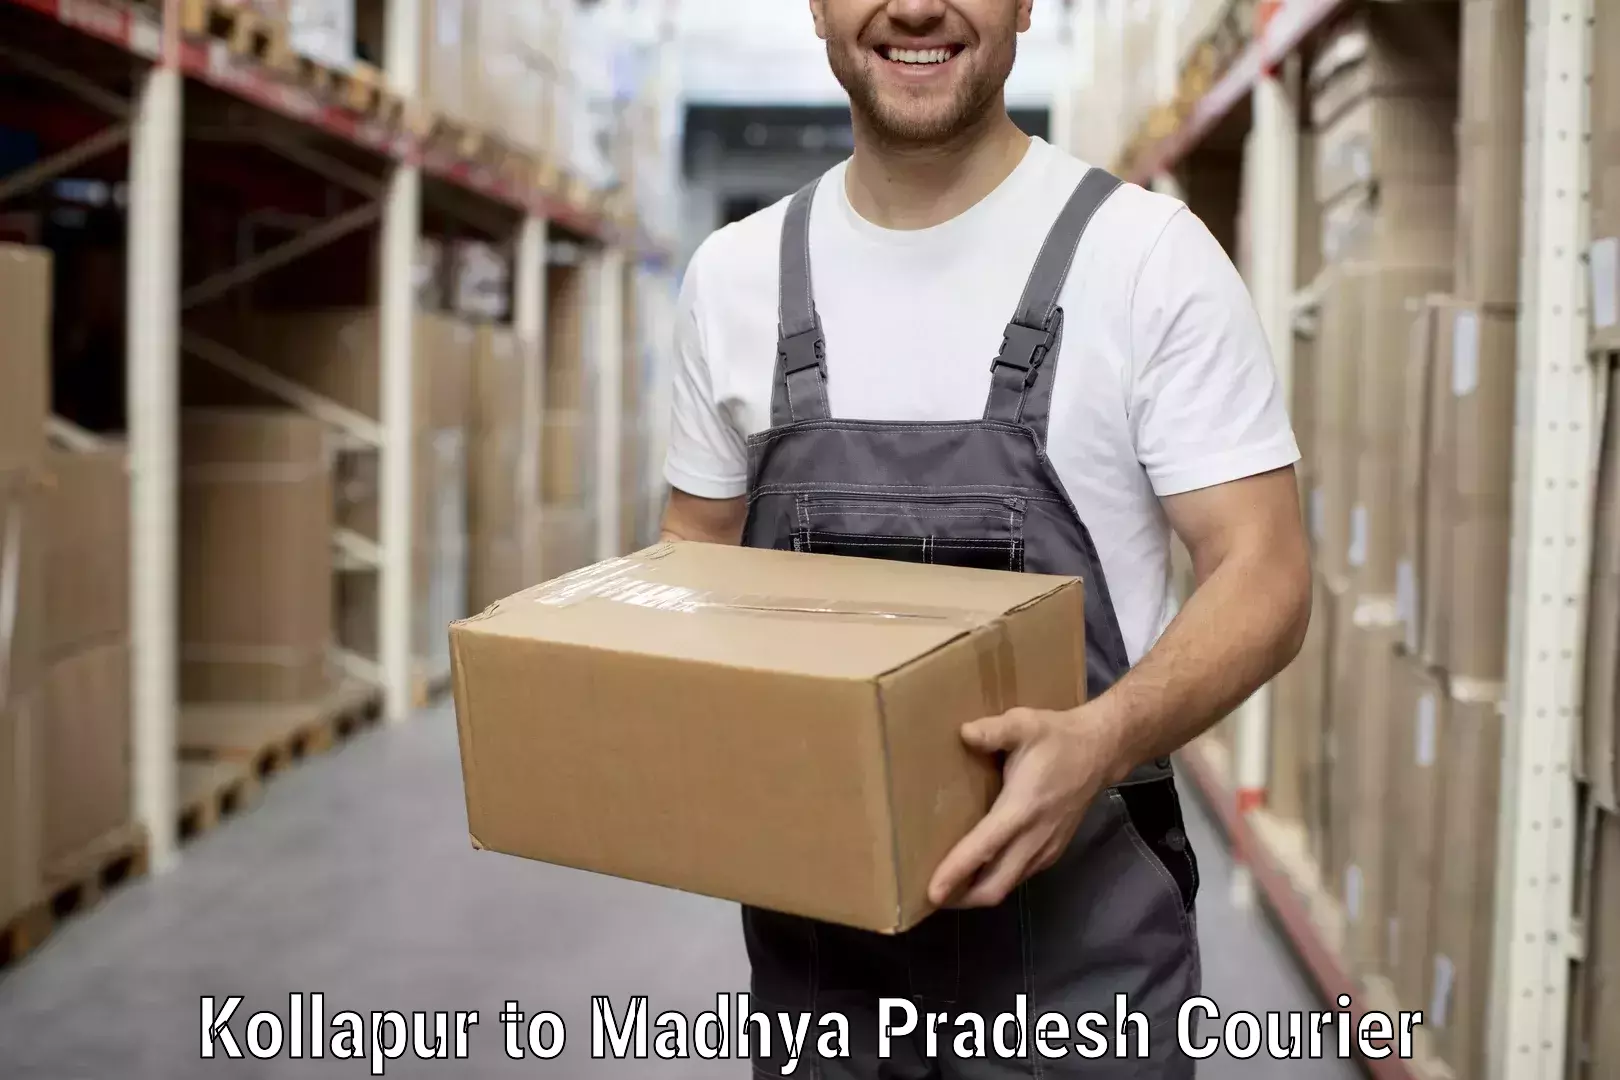 Furniture delivery service Kollapur to IIIT Bhopal